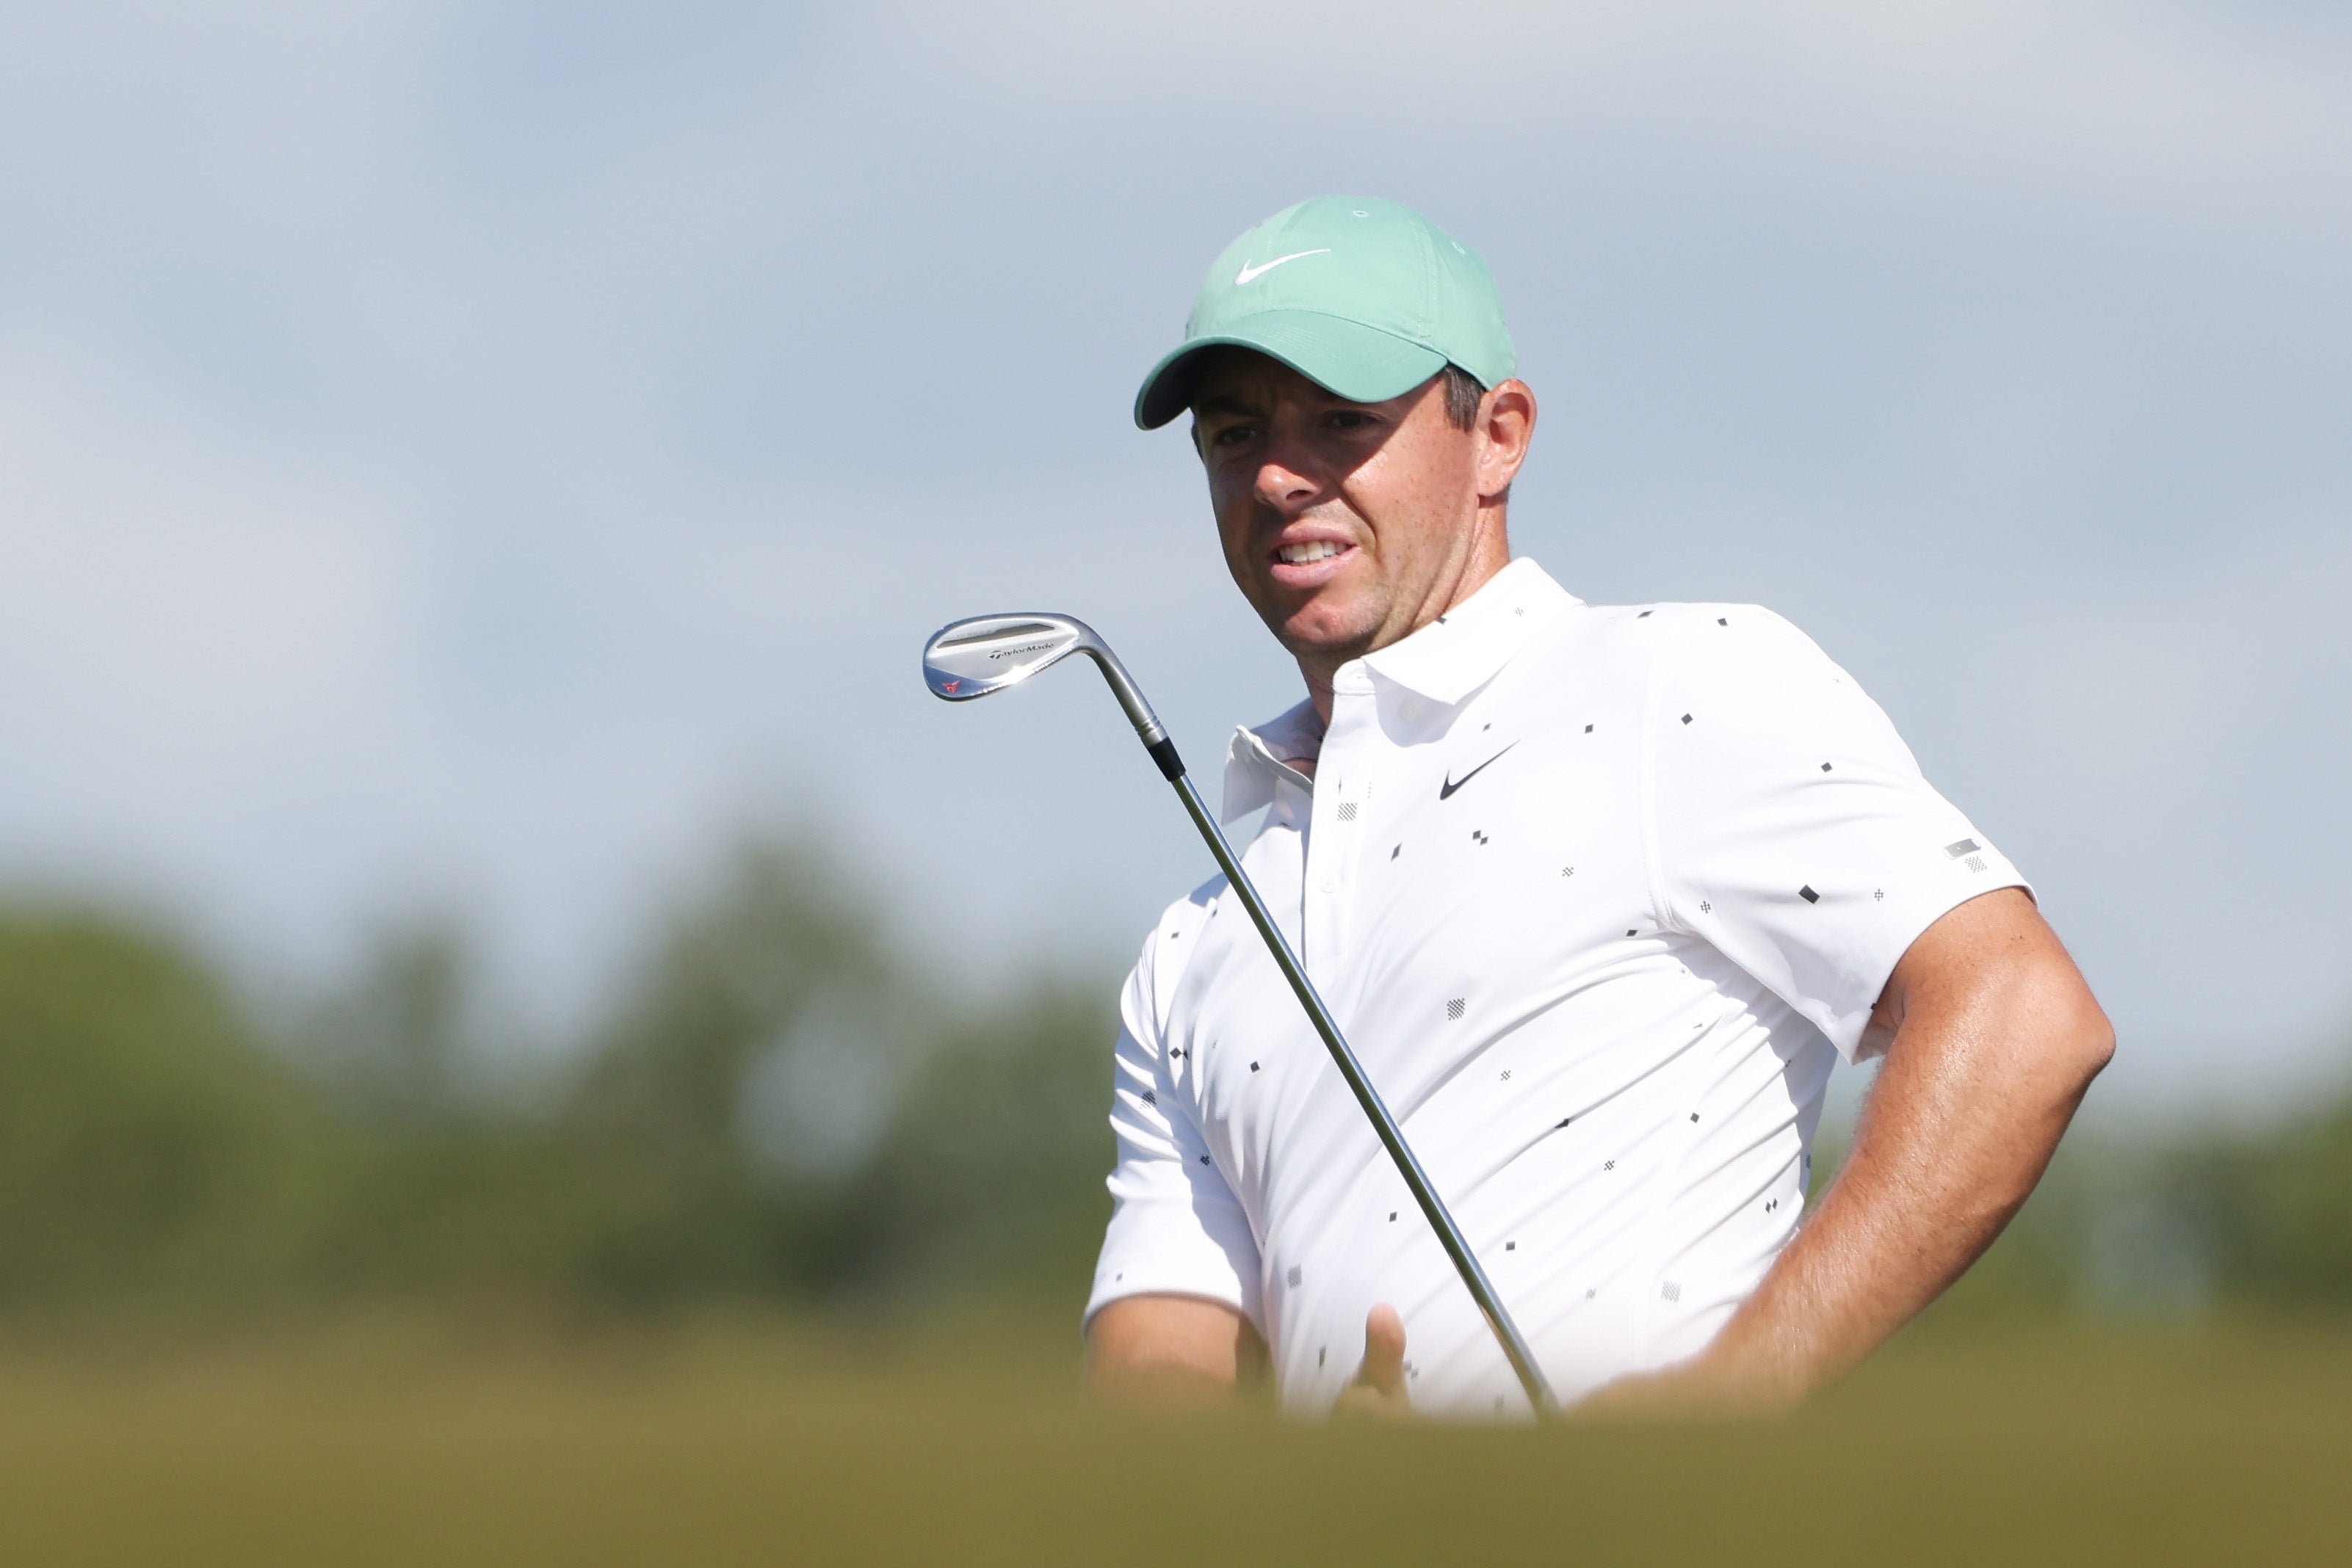 Rory McIlroy has work to do if he is to make the cut at Kiawah Island